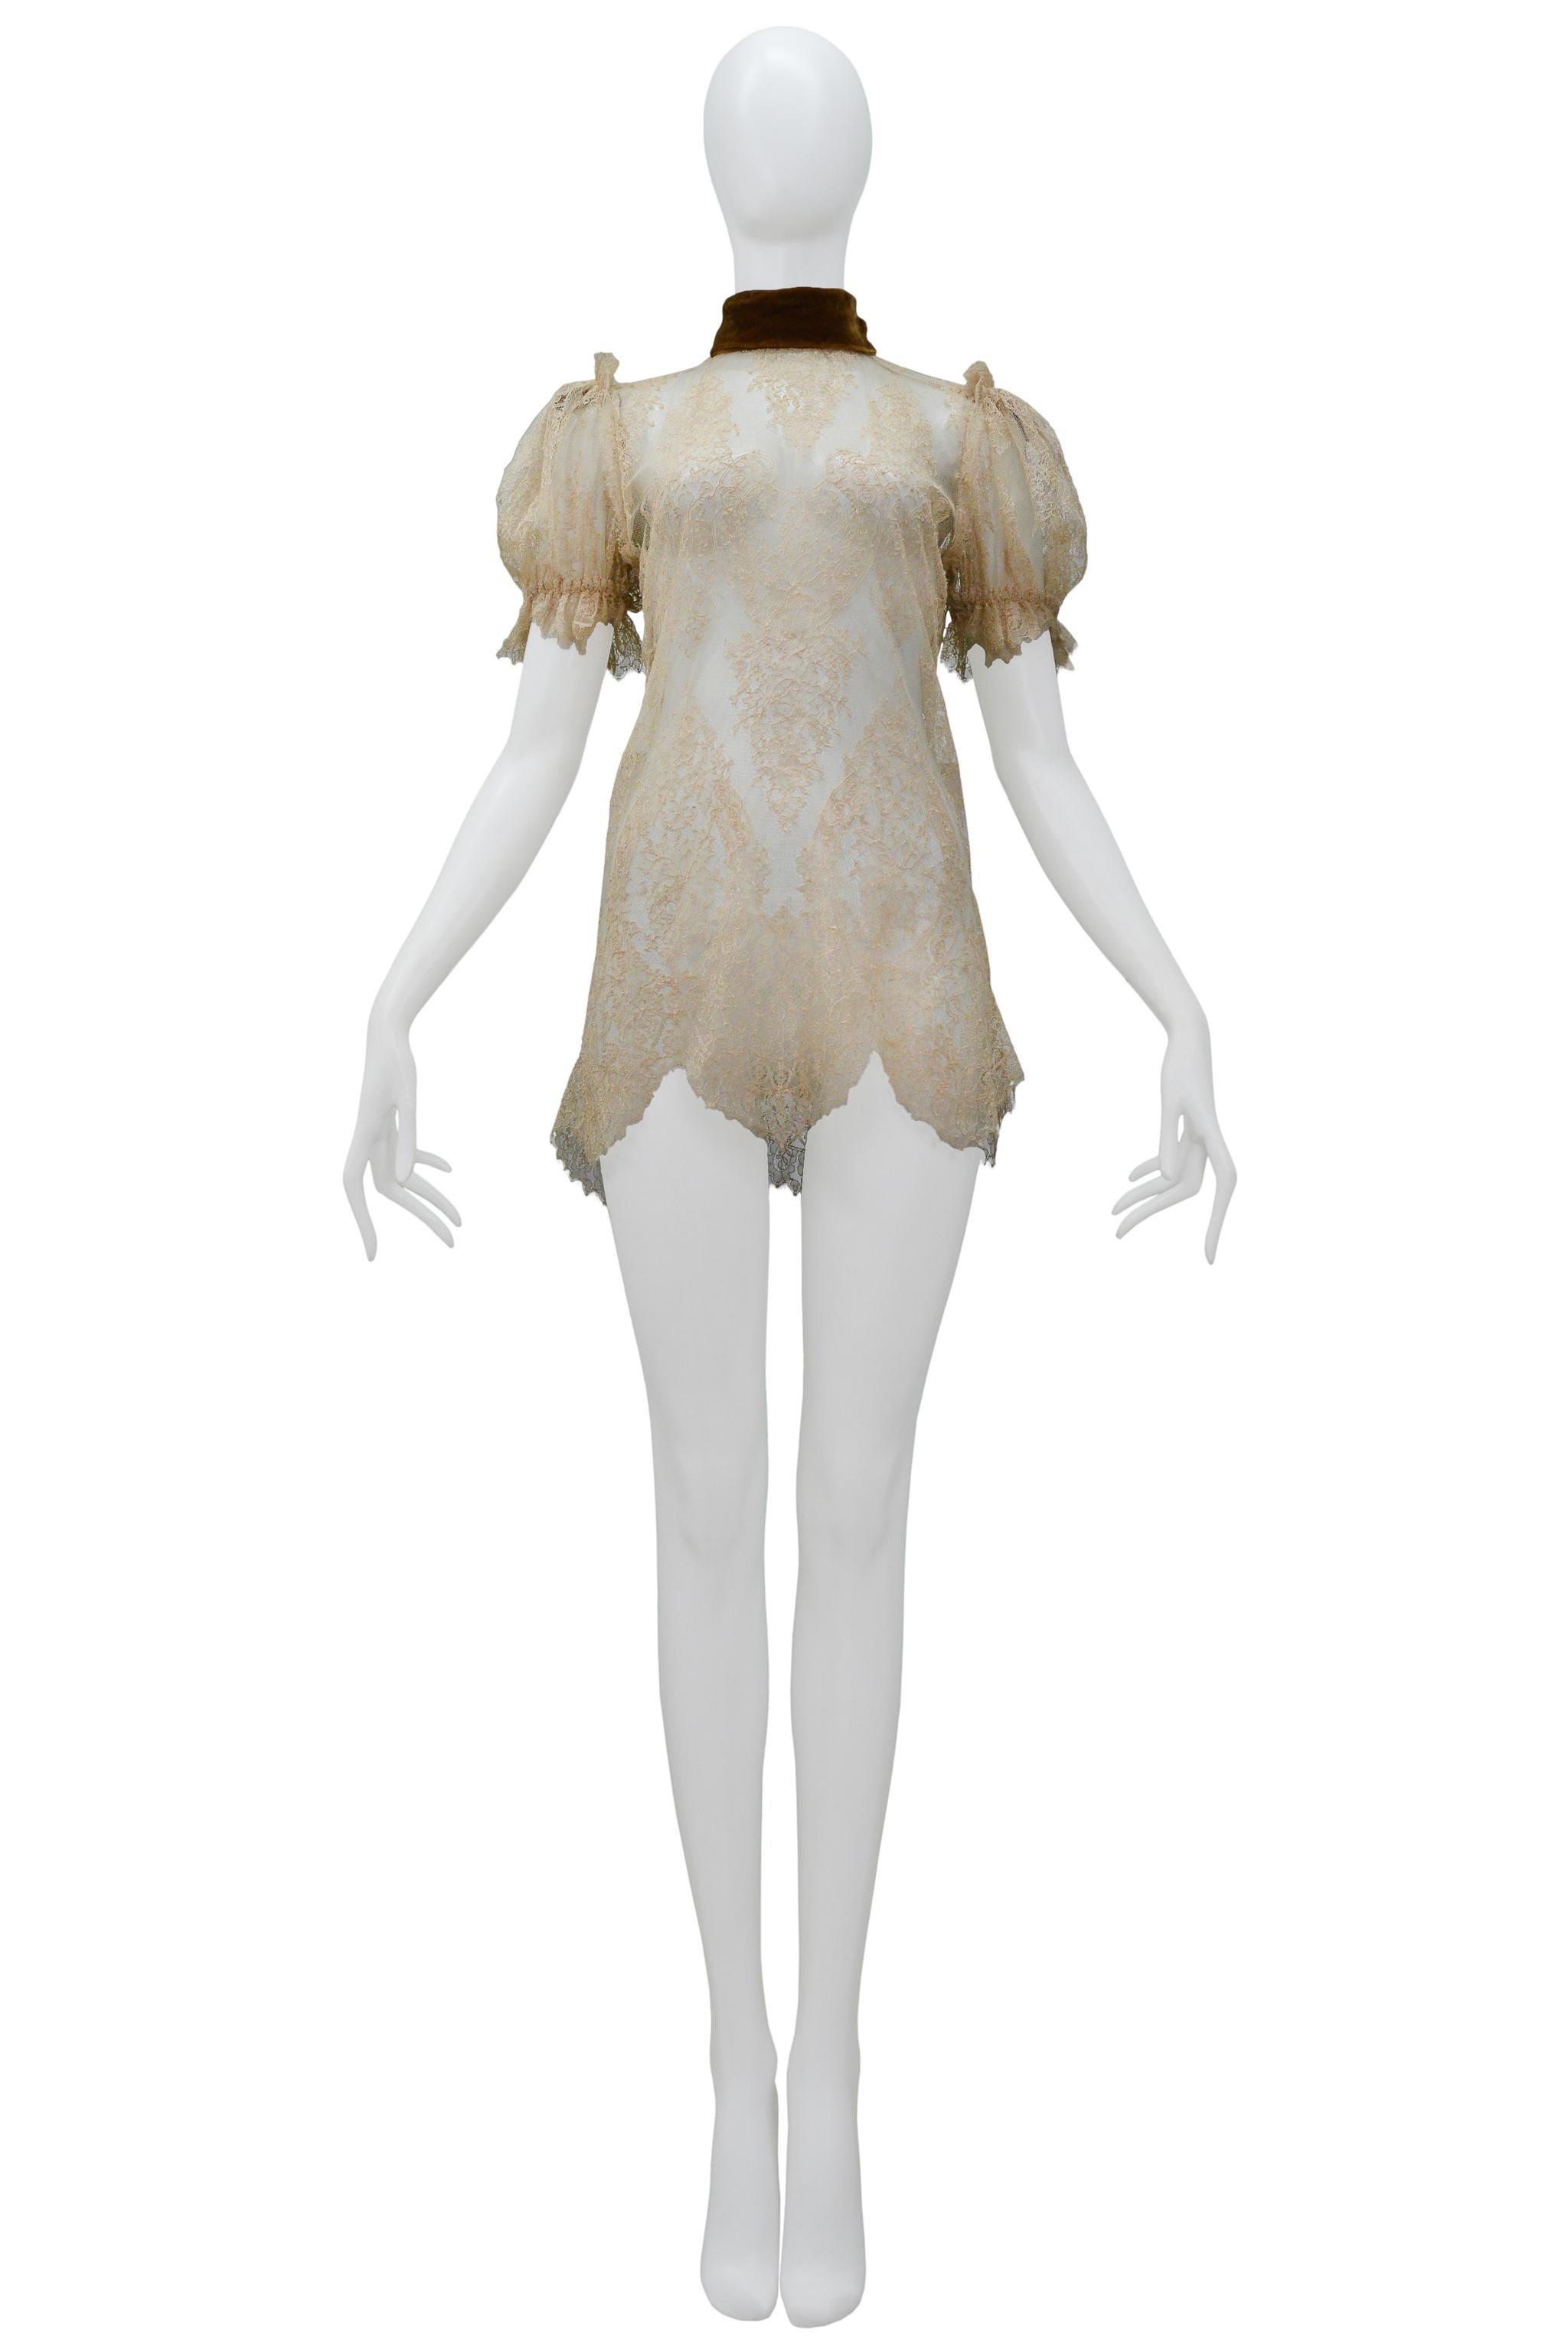 Resurrection Vintage is excited to offer a vintage Dolce & Gabbana off-white lace mini dress featuring puff short sleeves, a brown copper-colored collar, and a zipper at the back.

Dolce & Gabbana
Lace
38
Circa 2001
Made in Italy
Excellent Vintage